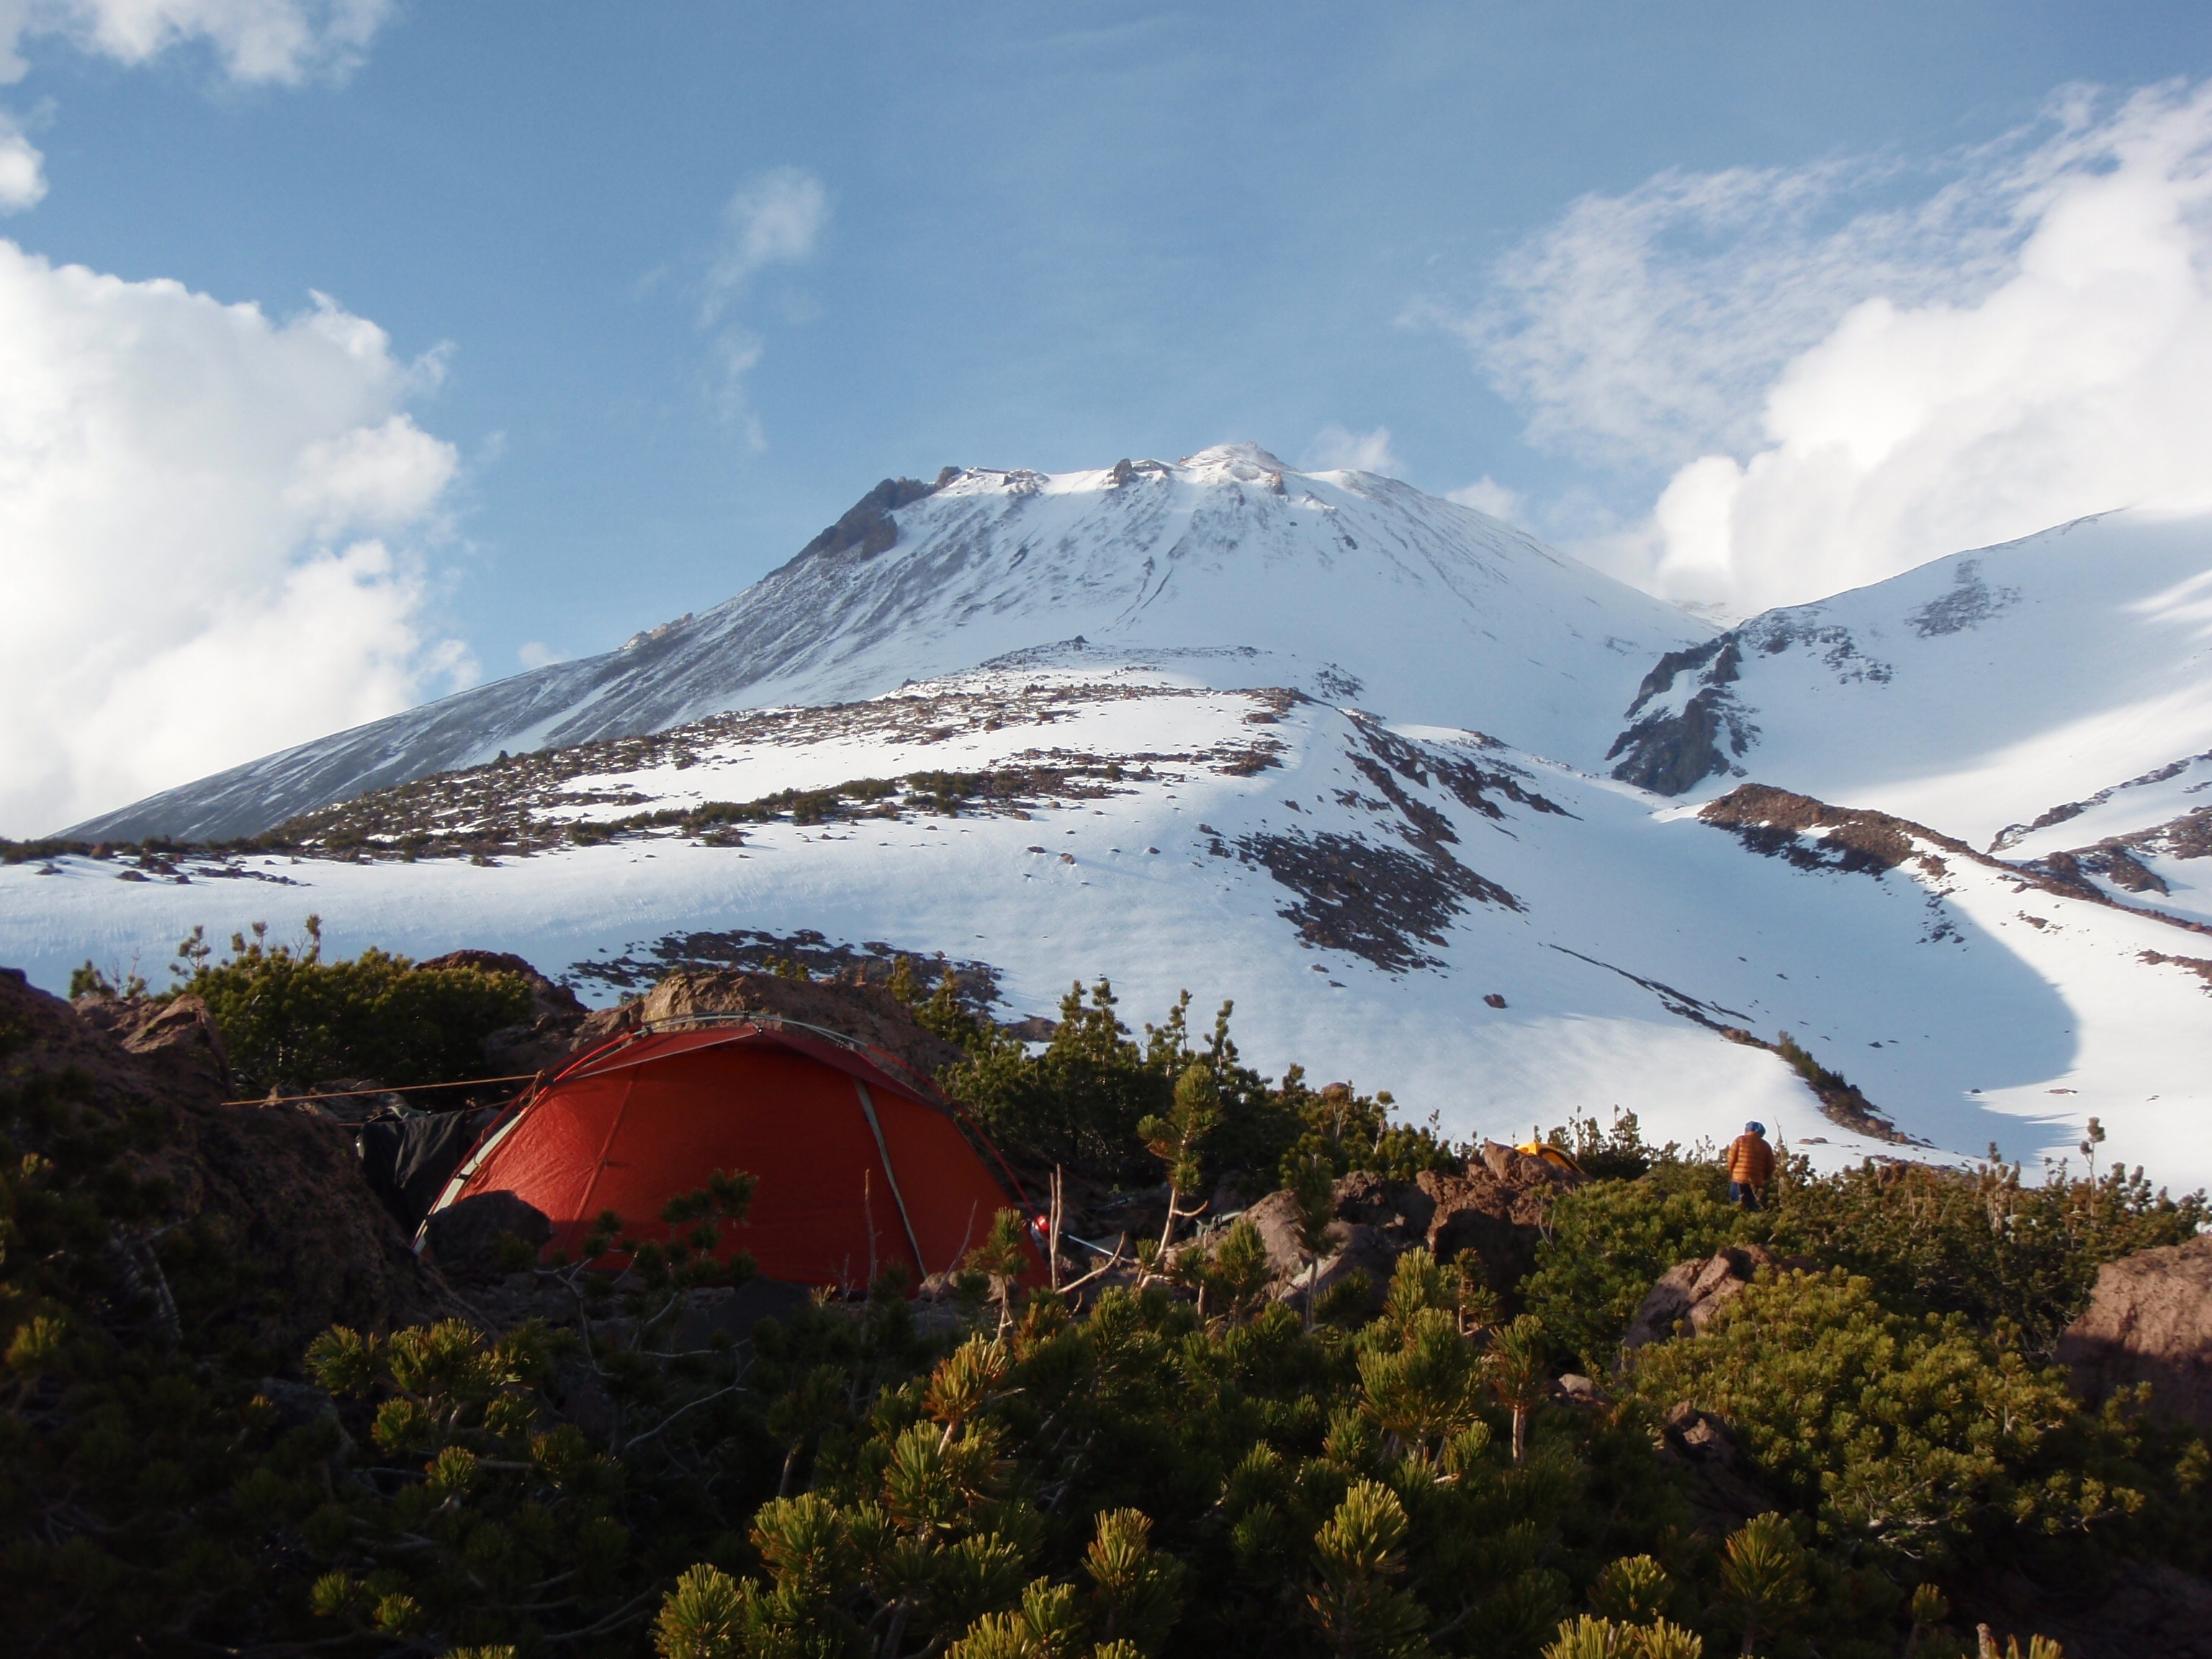 This photograph shows a camp on the flank of Mt. Shasta in the Mt. Shasta Wilderness Area.